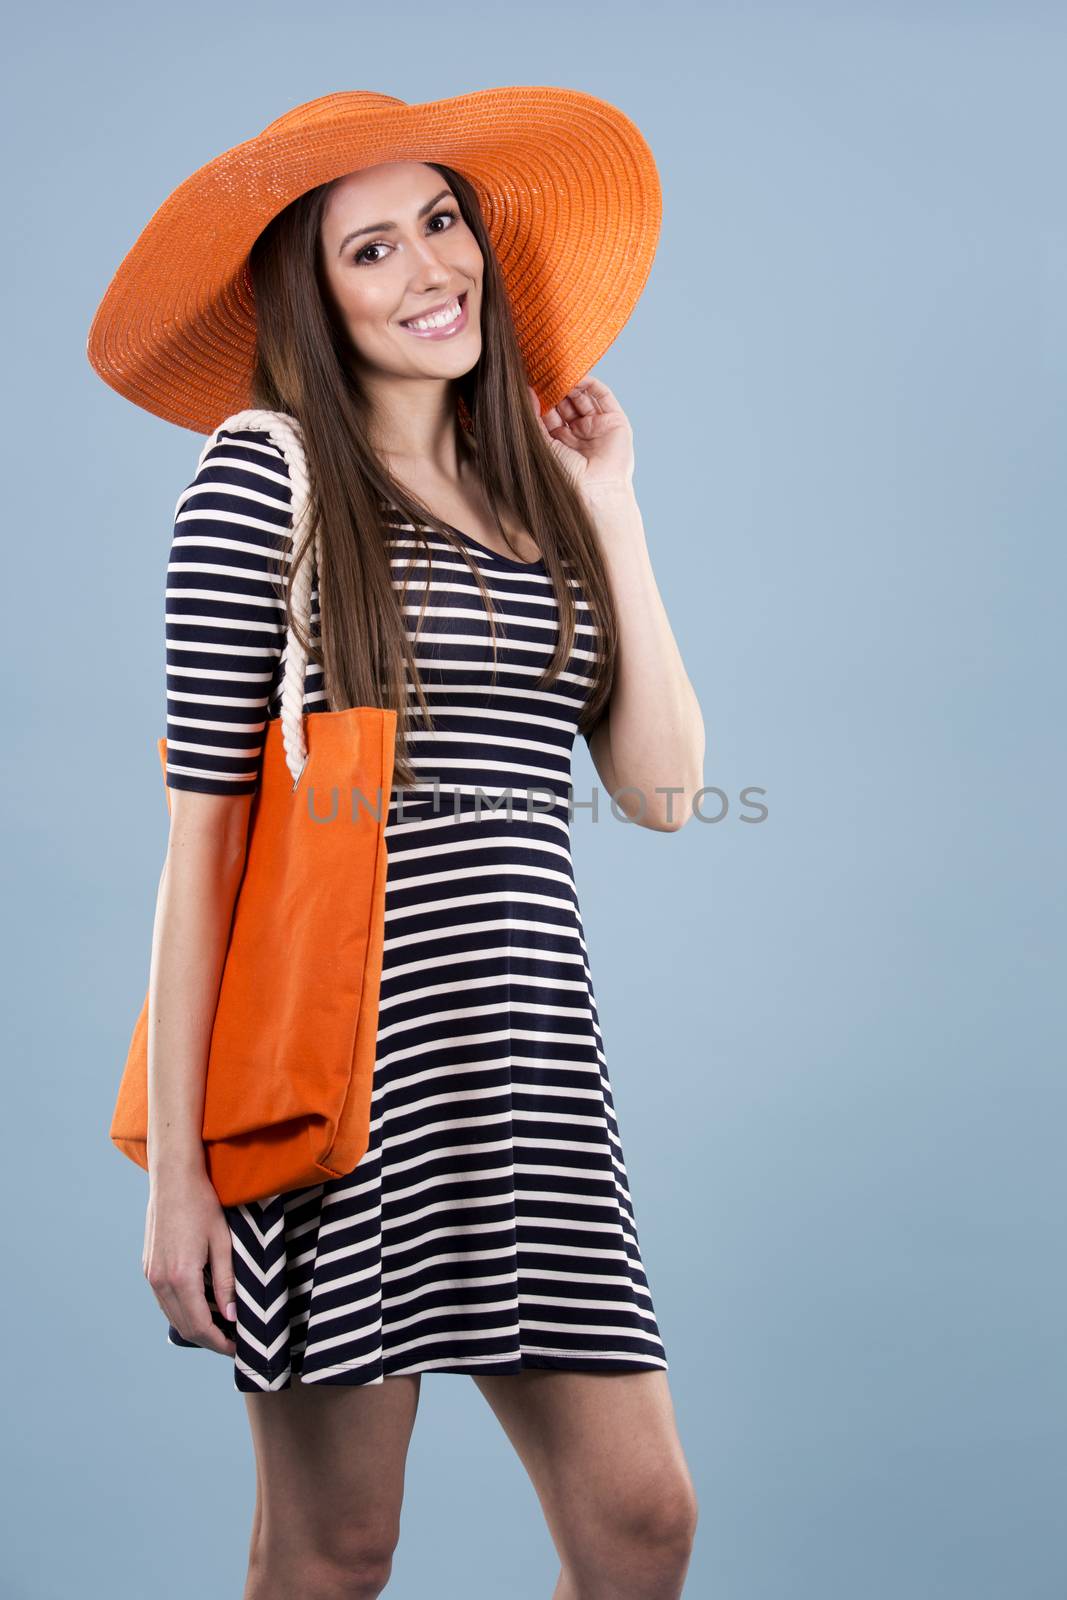 young woman wearing dress and orange hat on blue background